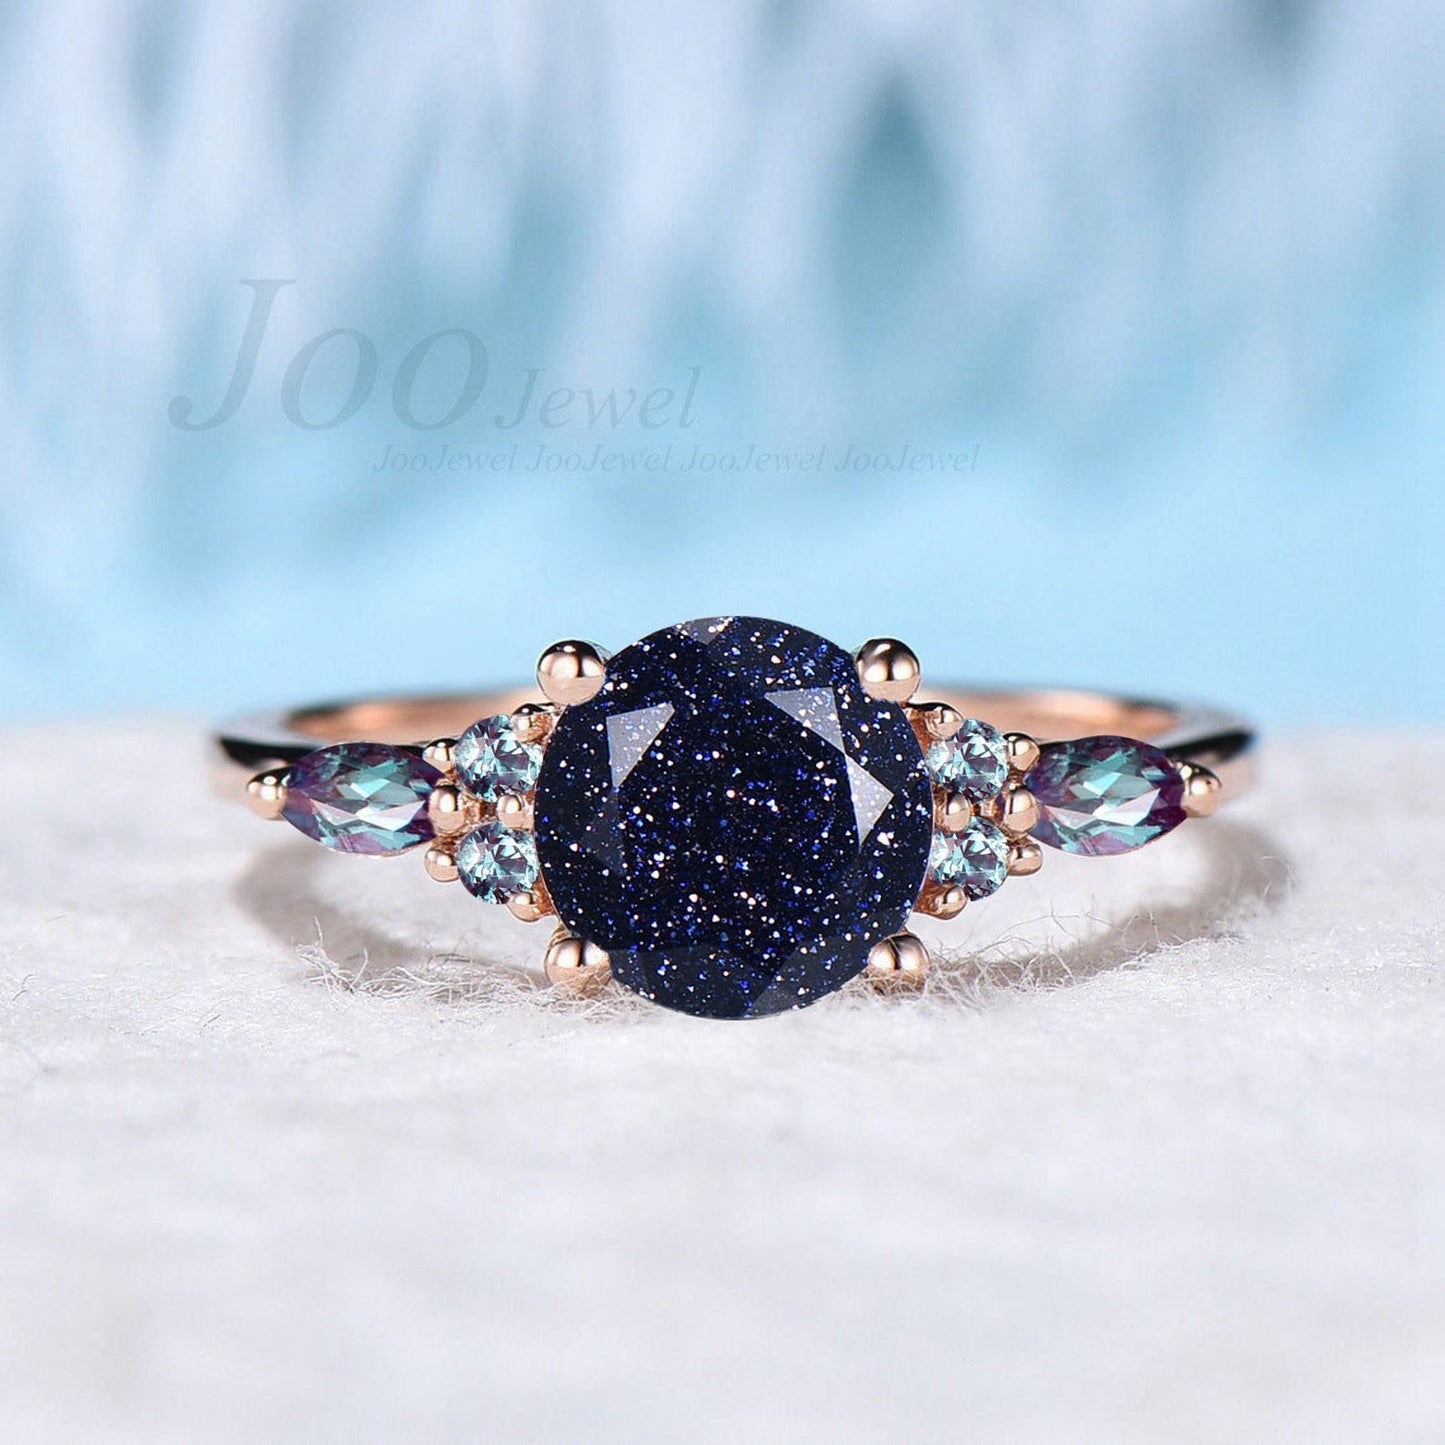 7mm Round Cut Galaxy Blue Sandstone Engagement Ring Vintage Color-Change Alexandrite Wedding Ring Unique Anniversary/Proposal Gift For Women